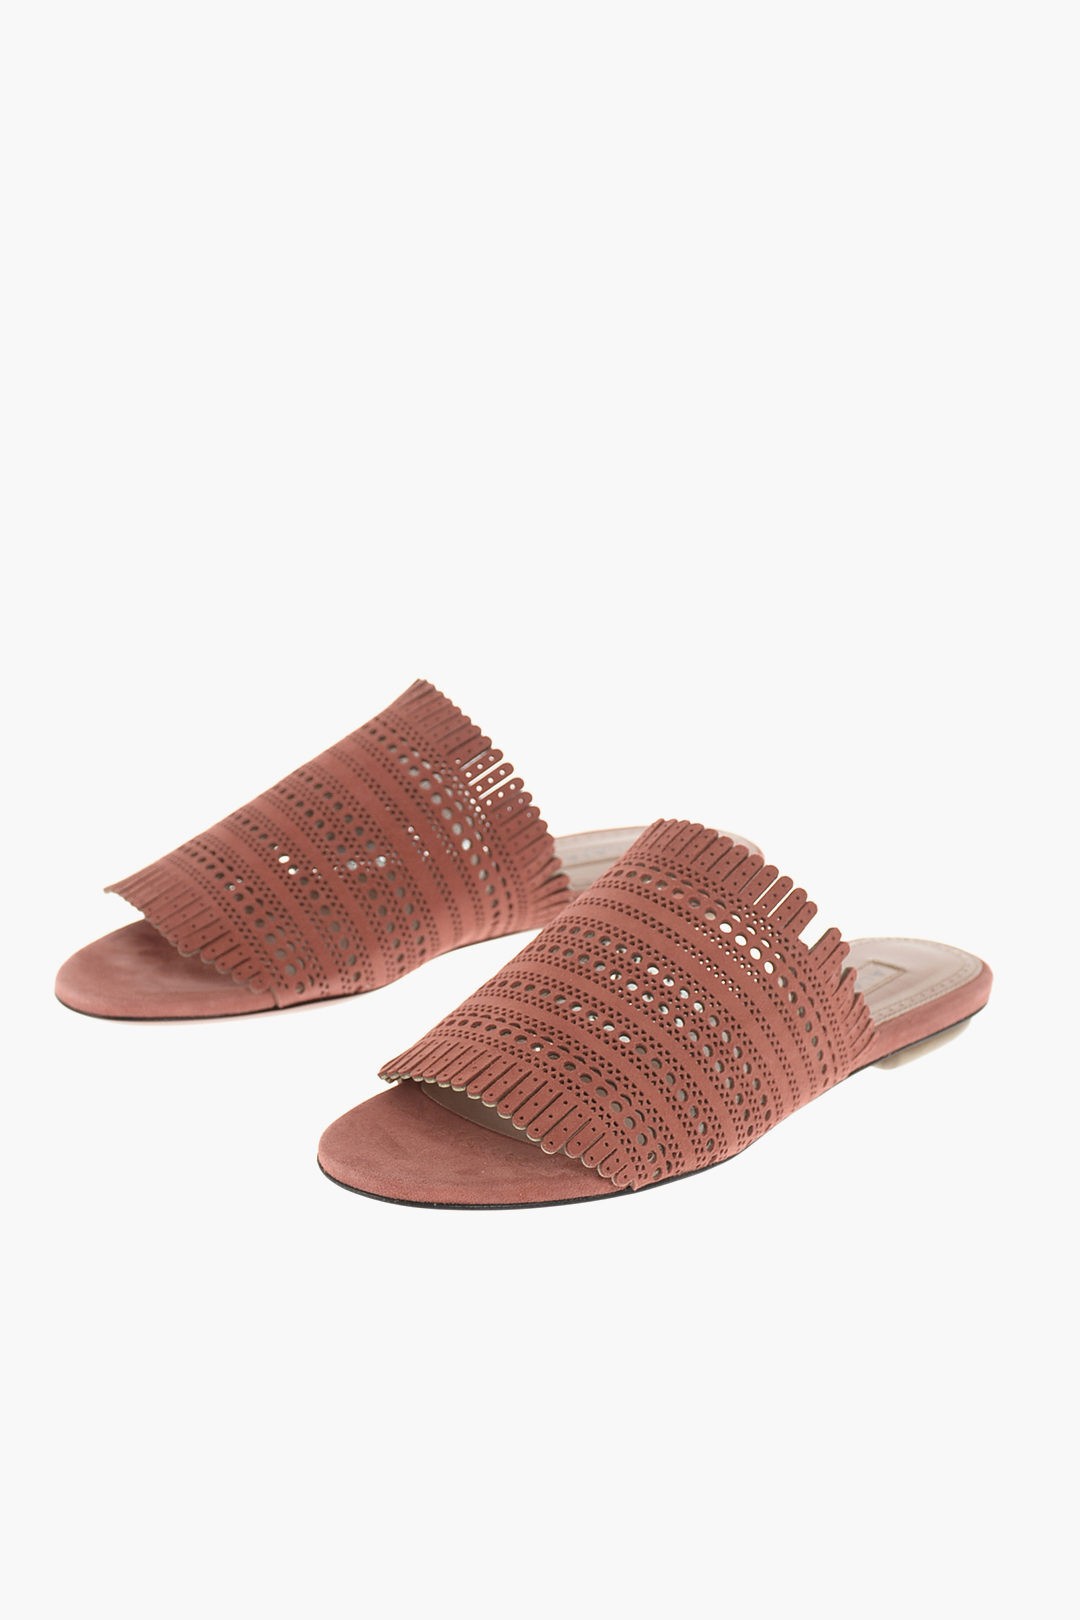 ALAIA アライア Pink フラットシューズ AA3M041C/K039723 レディース PERFORATED SUEDE FLAT SANDALS 【関税・送料無料】【ラッピング無料】 dk